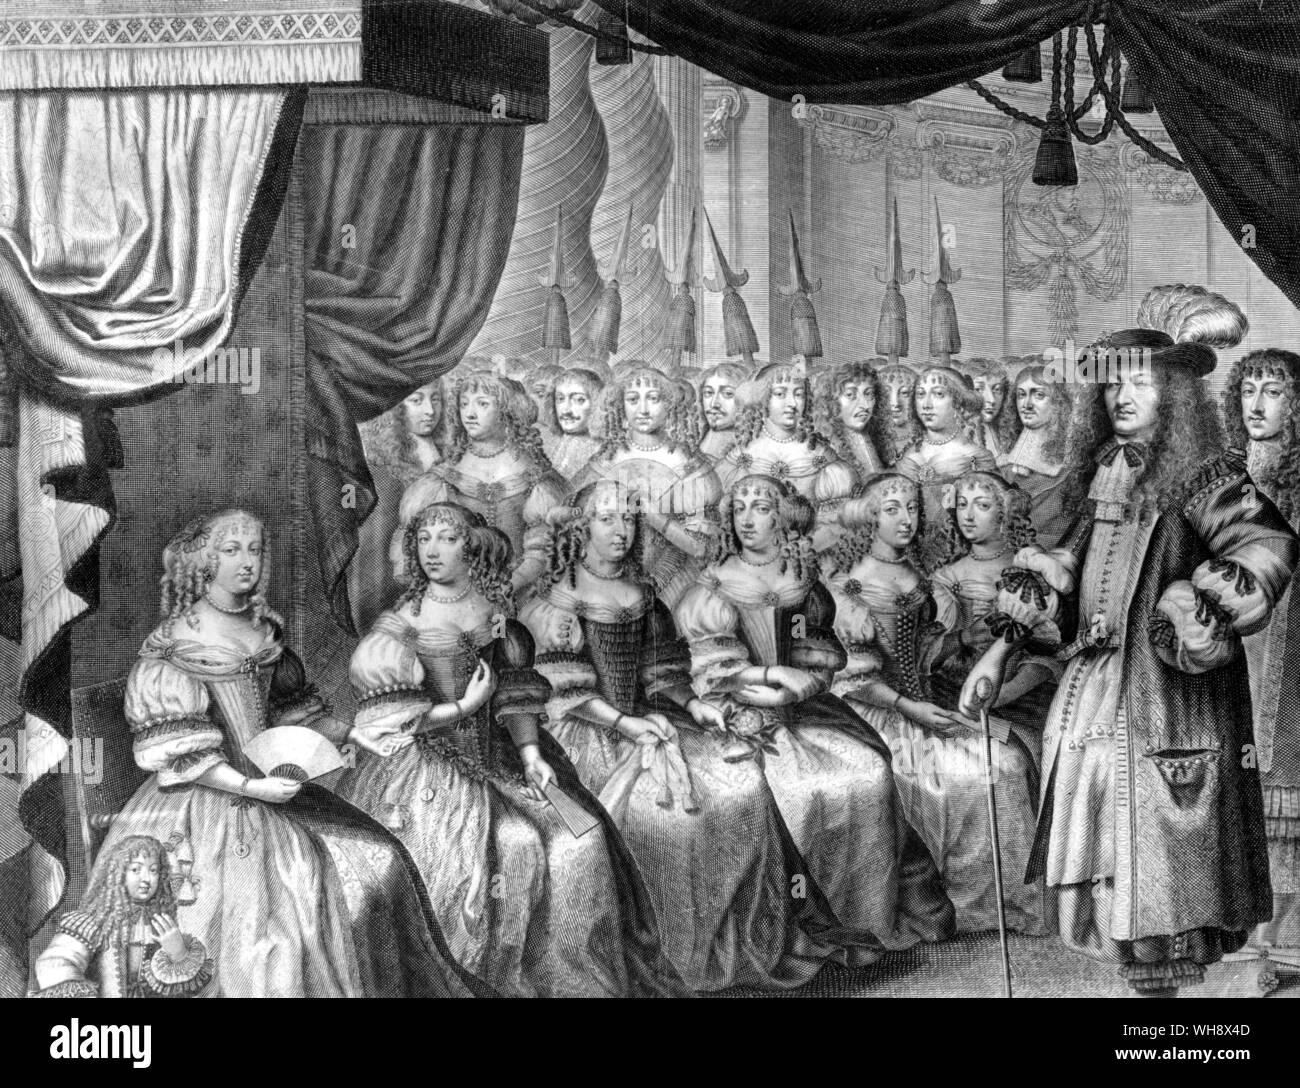 Louis XIV, King of France, the Sun King, (1638-1715), (reigned 1643-1715), among the ladies at Court. An engraving from the Almanack of 1667. The Sun King by Nancy Mitford, page 27. Stock Photo